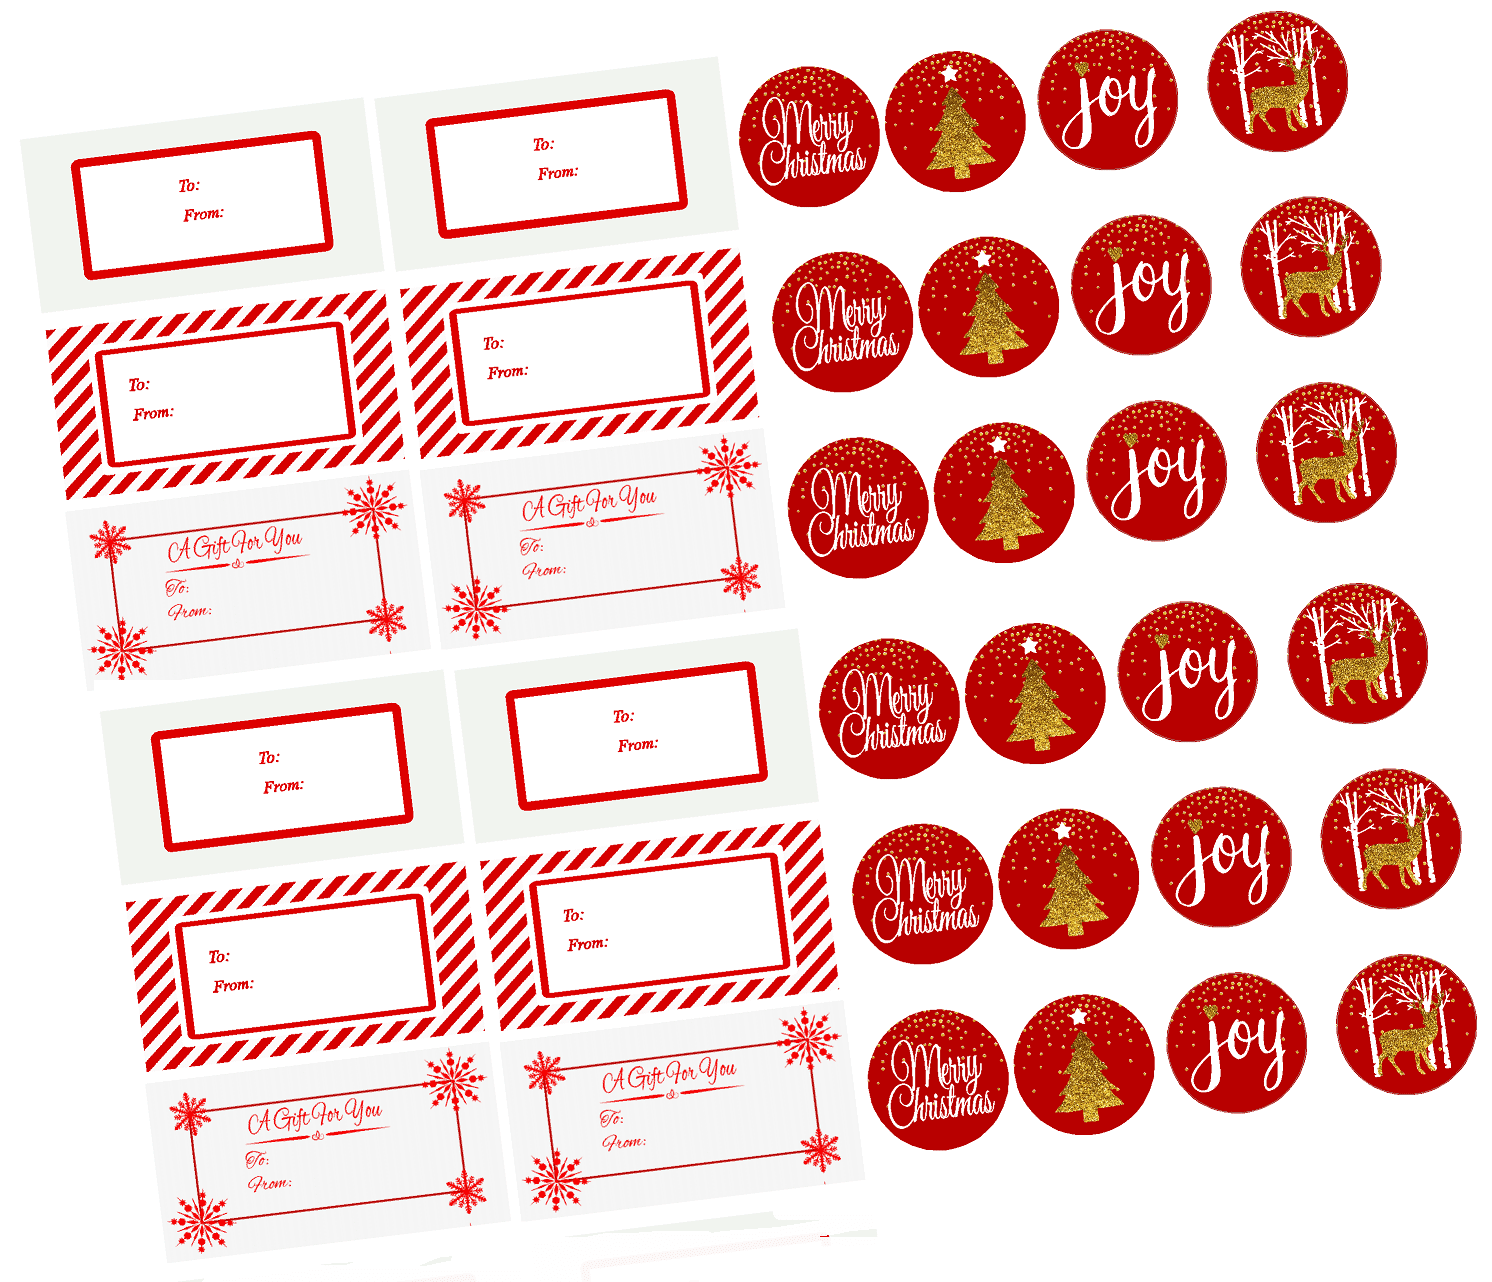 15 Assorted Glitter, Foil, printed designs for DIY Xmas Present Wrap and Label Package Name Card Christmas Gift Tags 60 Count with Untied String 